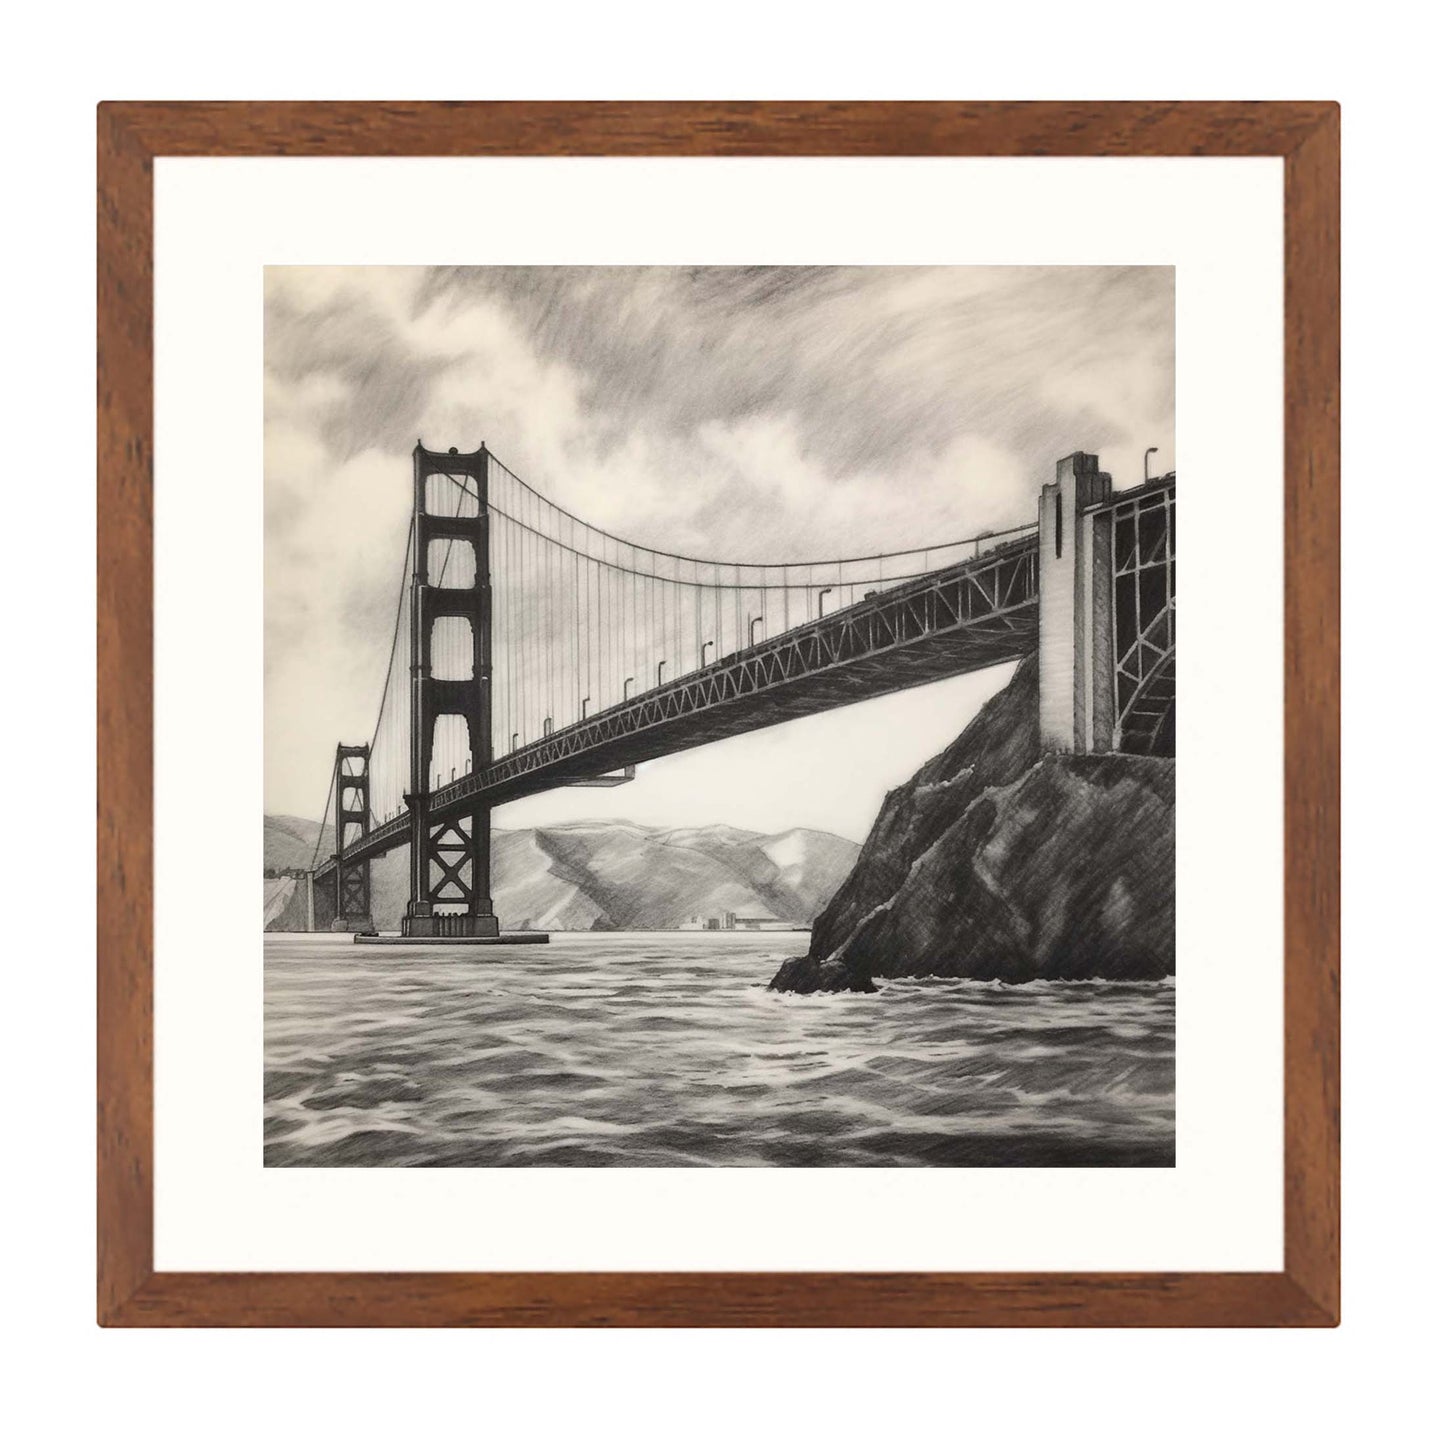 San Francisco Golden Gate Bridge - Mural in the style of a drawing